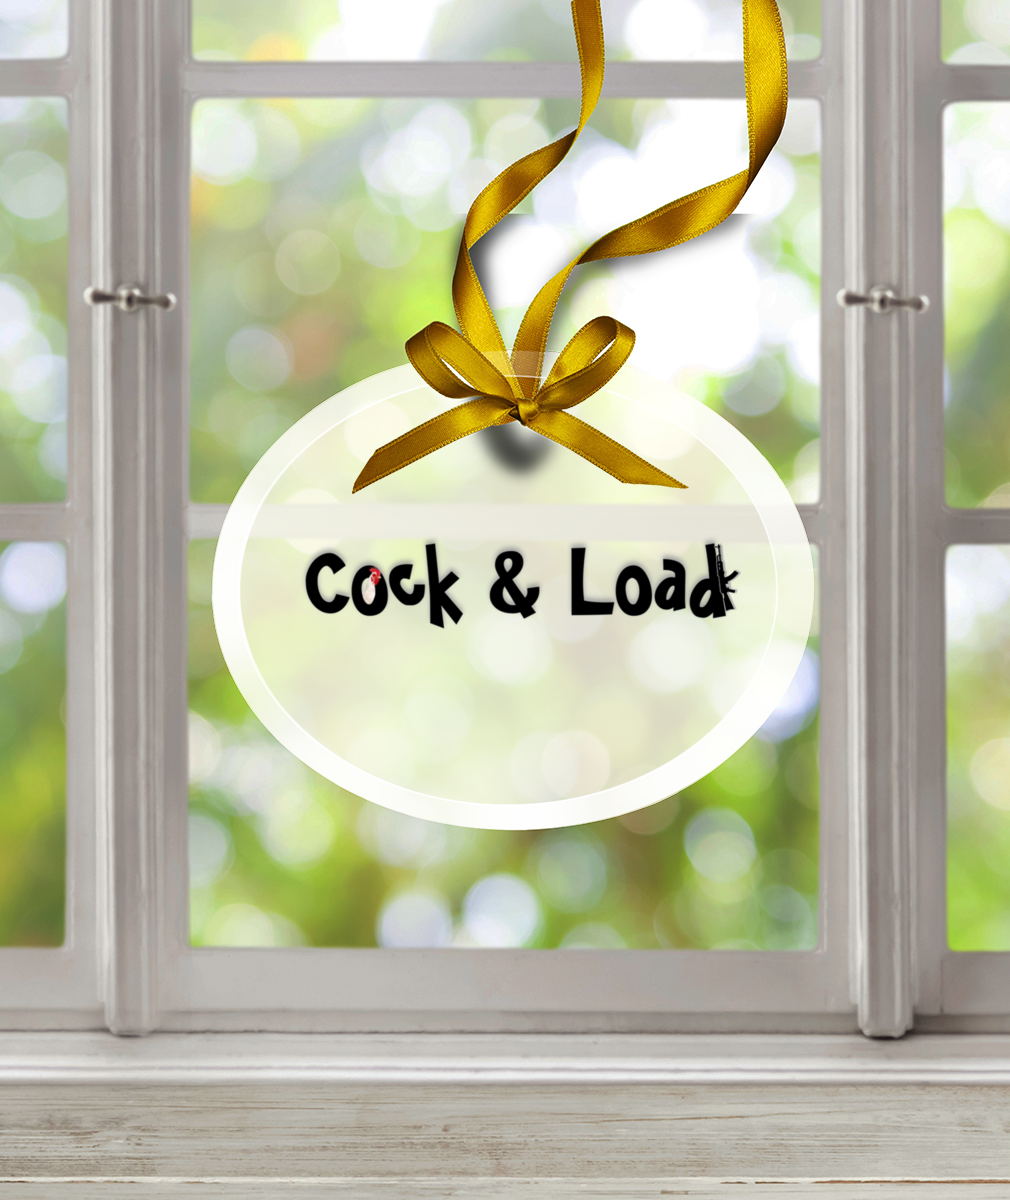 Cock n load Glass Ornament - Oval (Landscape 3